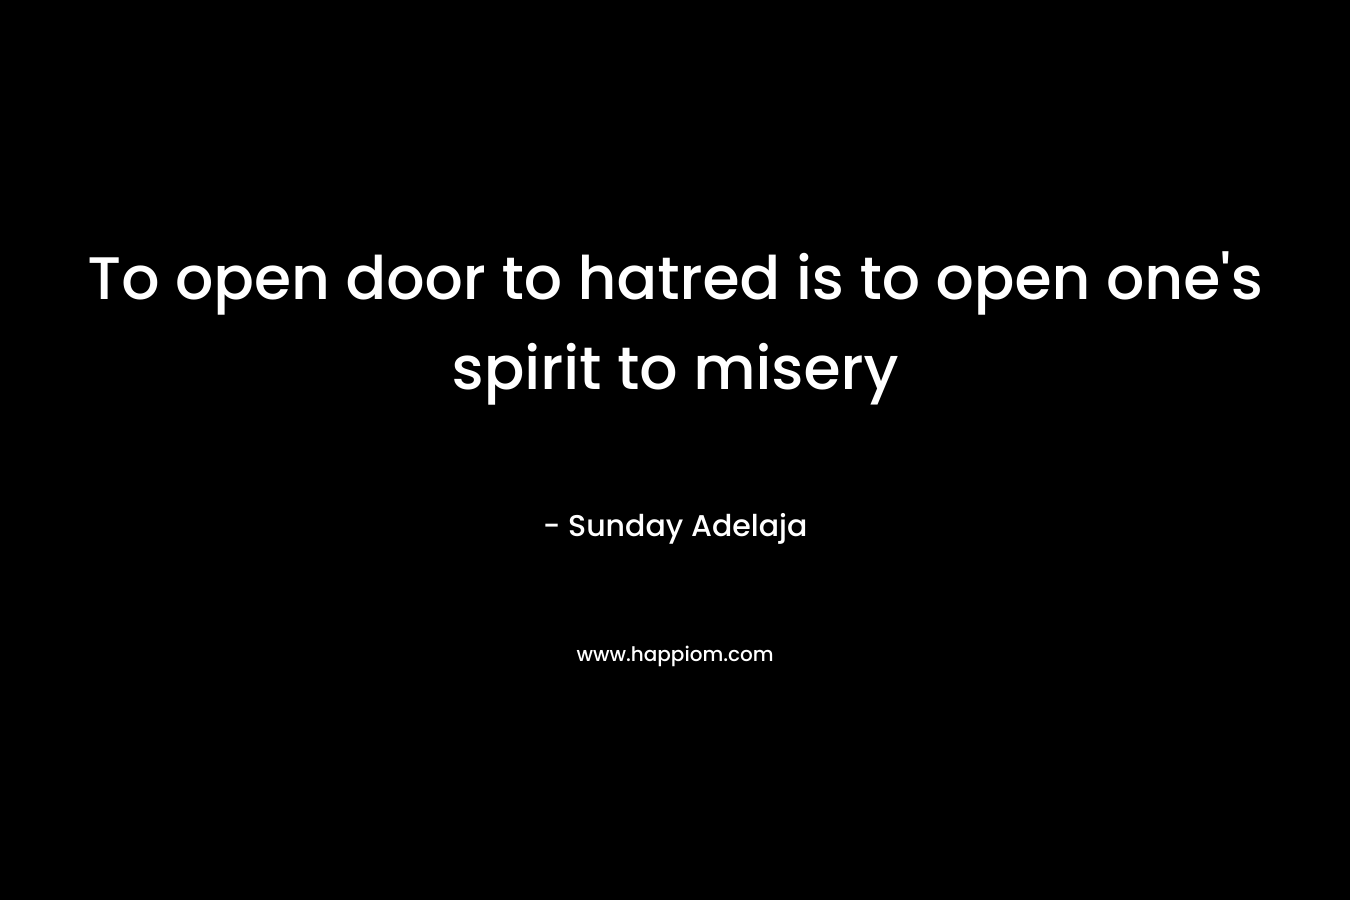 To open door to hatred is to open one's spirit to misery